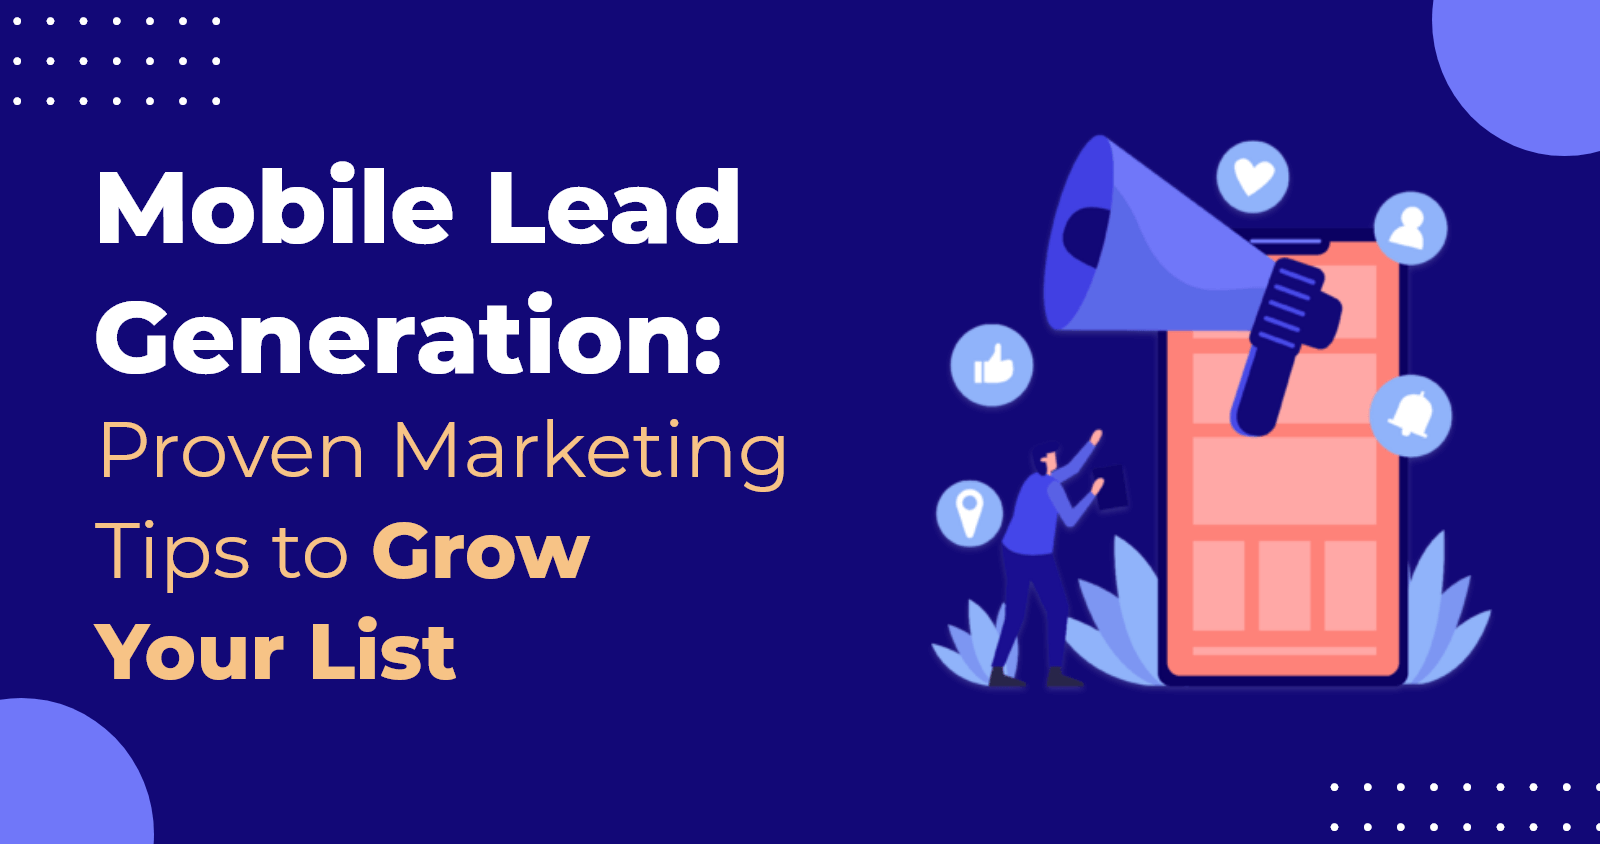 Mobile Lead Generation Proven Marketing Tips to Grow Your List